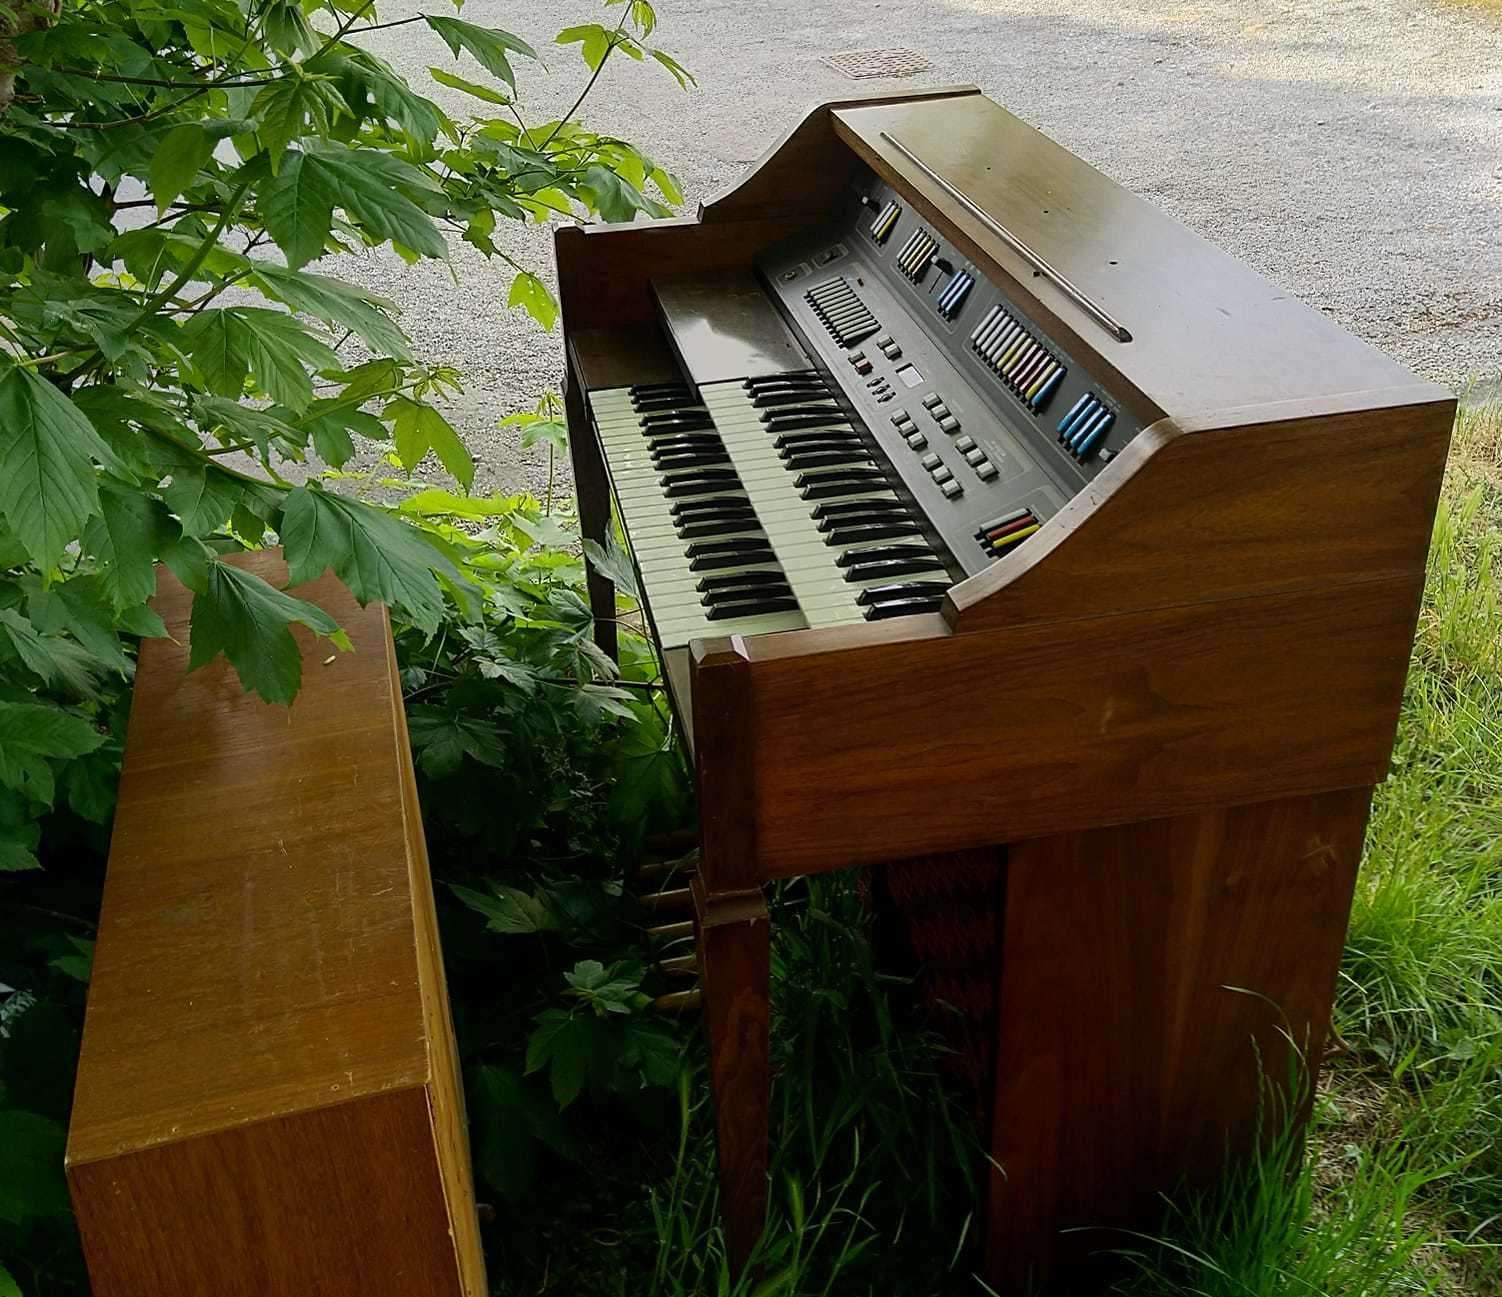 An organ was fly-tipped in Culcroft, Hartley. Picture: Tony Whittam